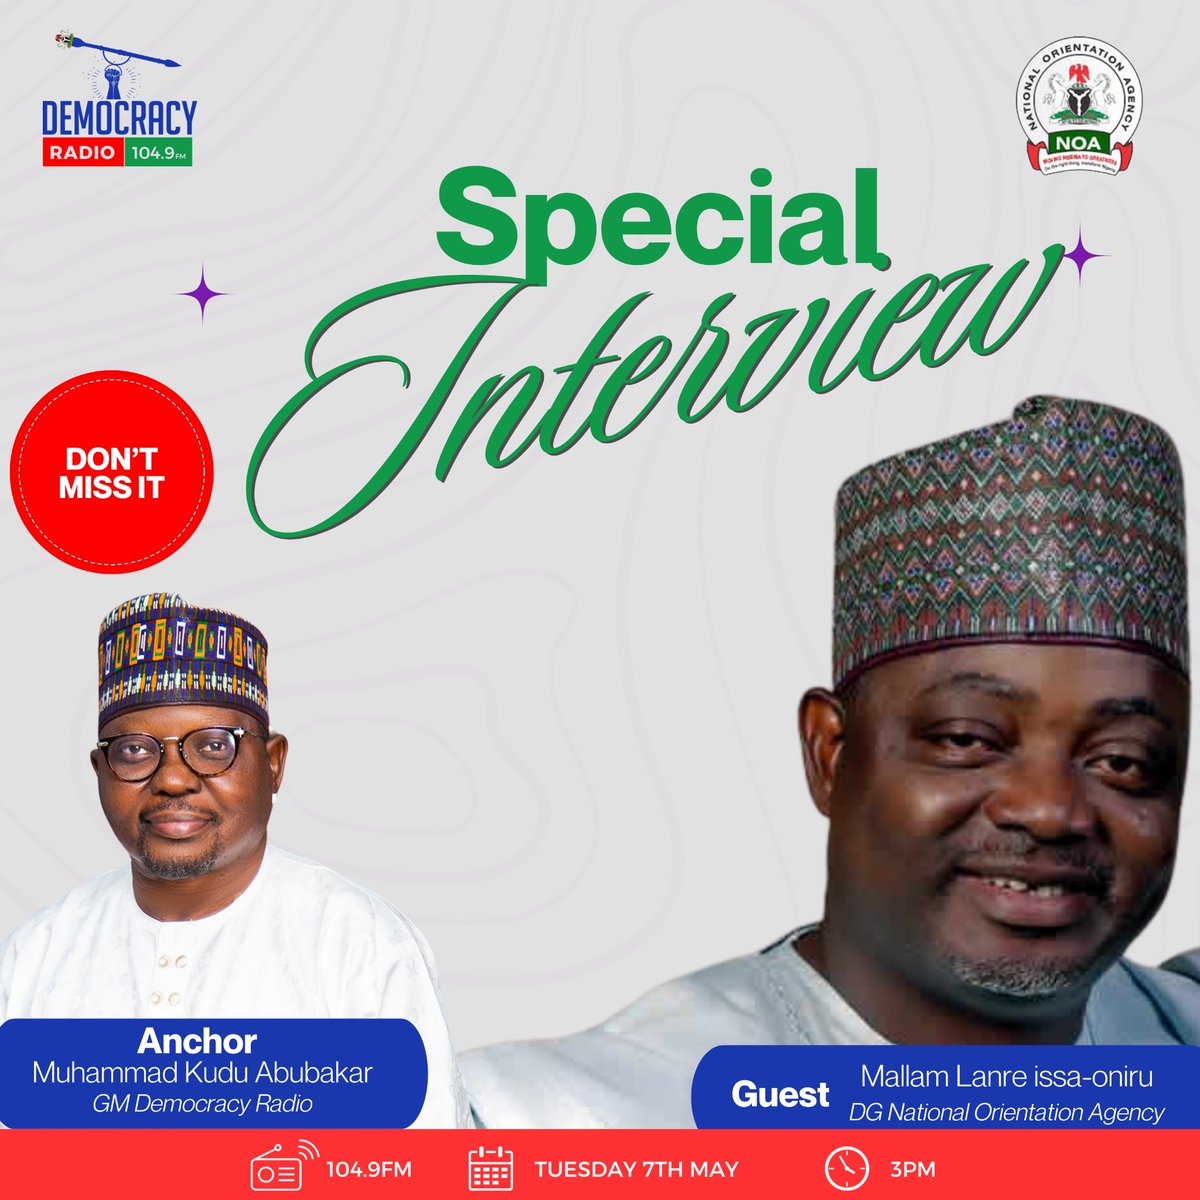 Join us tomorrow for an exclusive interview with the Director General, National Orientation Agency at 3pm on Democracy radio 104.9.

Don’t miss out on this insightful conversation!

#Democracyradio #Exculsiveinterview  #Nigeria